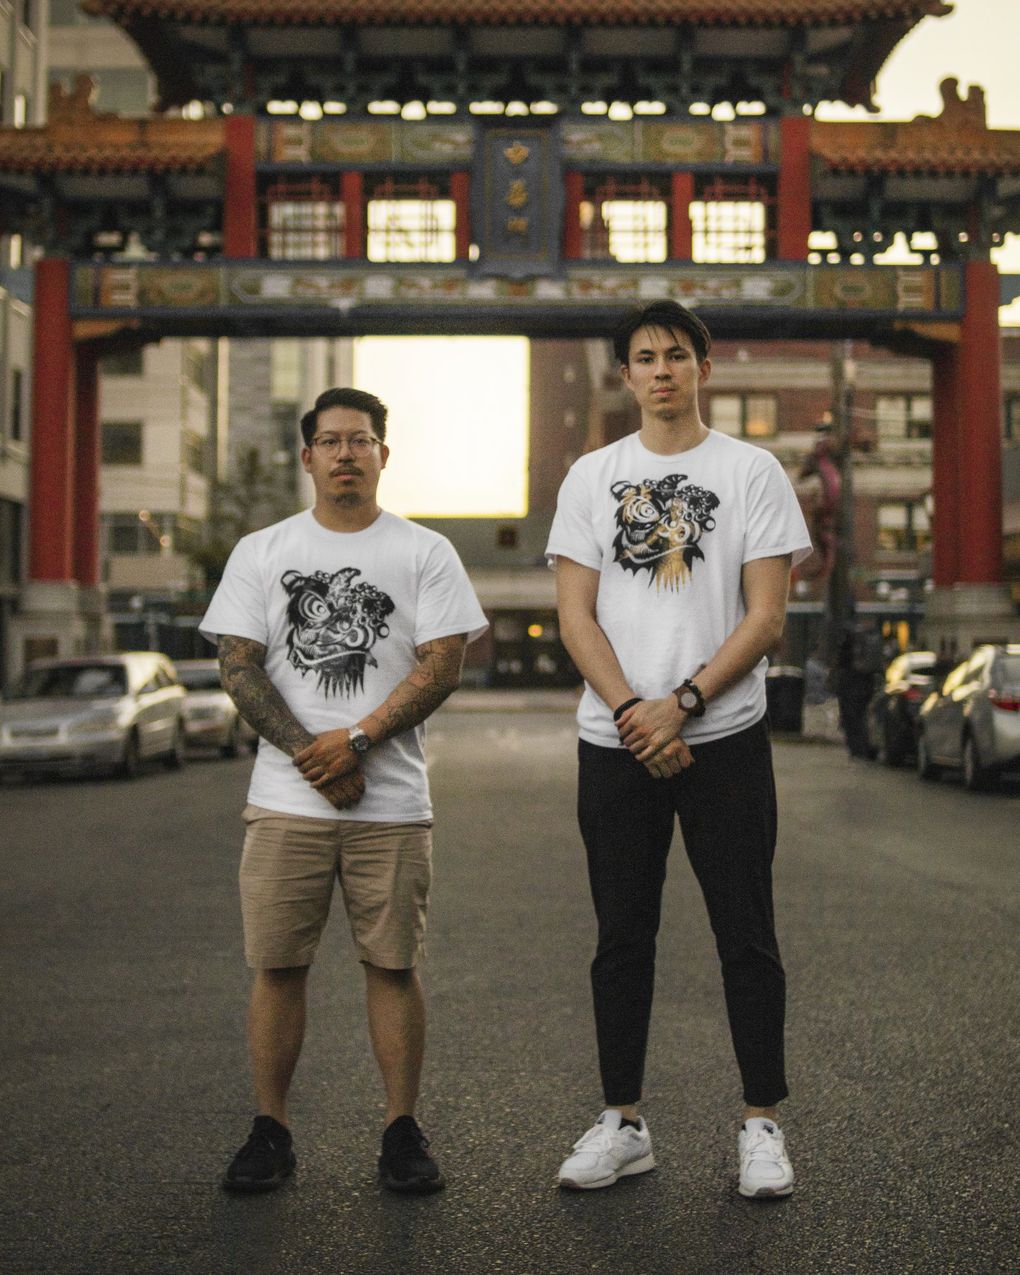 PRSVRNC Clothing founders Royal Tan and Han Eckelberg pose across from Hing Hay Park in the Chinatown International District. The duo’s goal, with clothing and accessories depicting Chinese cultural symbols, is to “bring Asian American pride, cultural items and the meanings of Asian American culture into clothing.” (Wen Eckelberg)